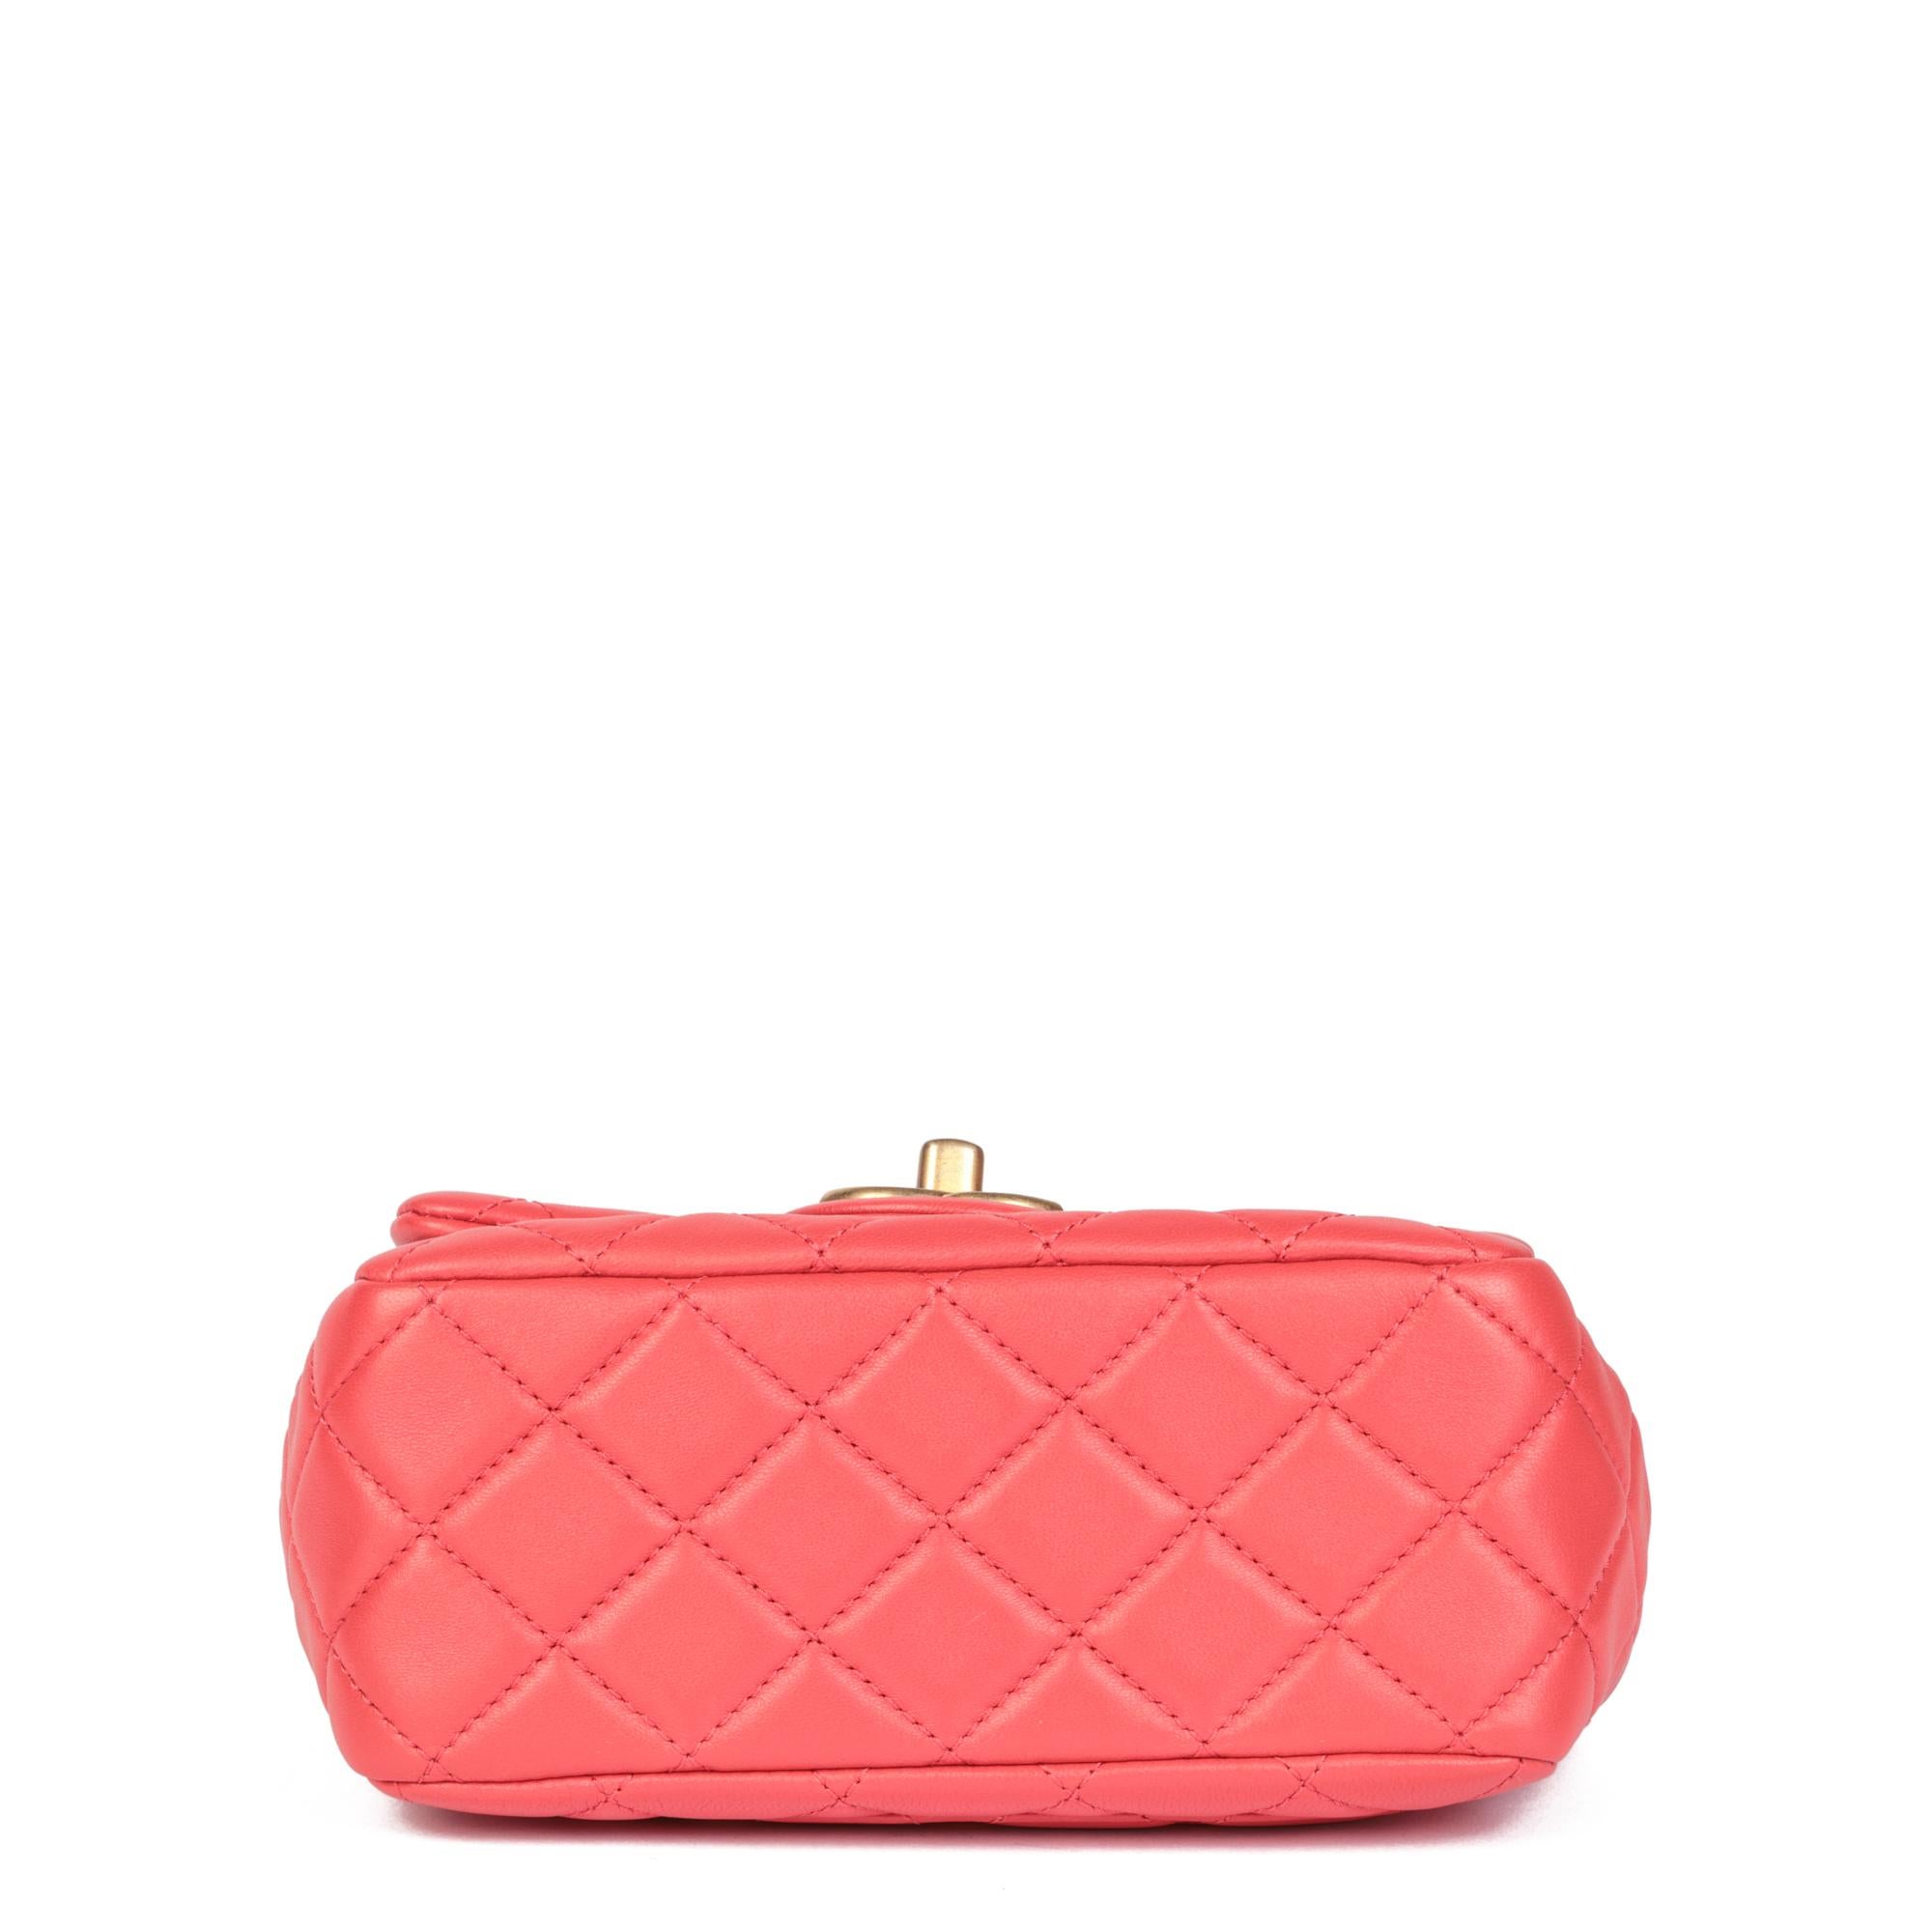 CHANEL Coral Red Quilted Lambskin Jewels Square Mini Flap Bag 2